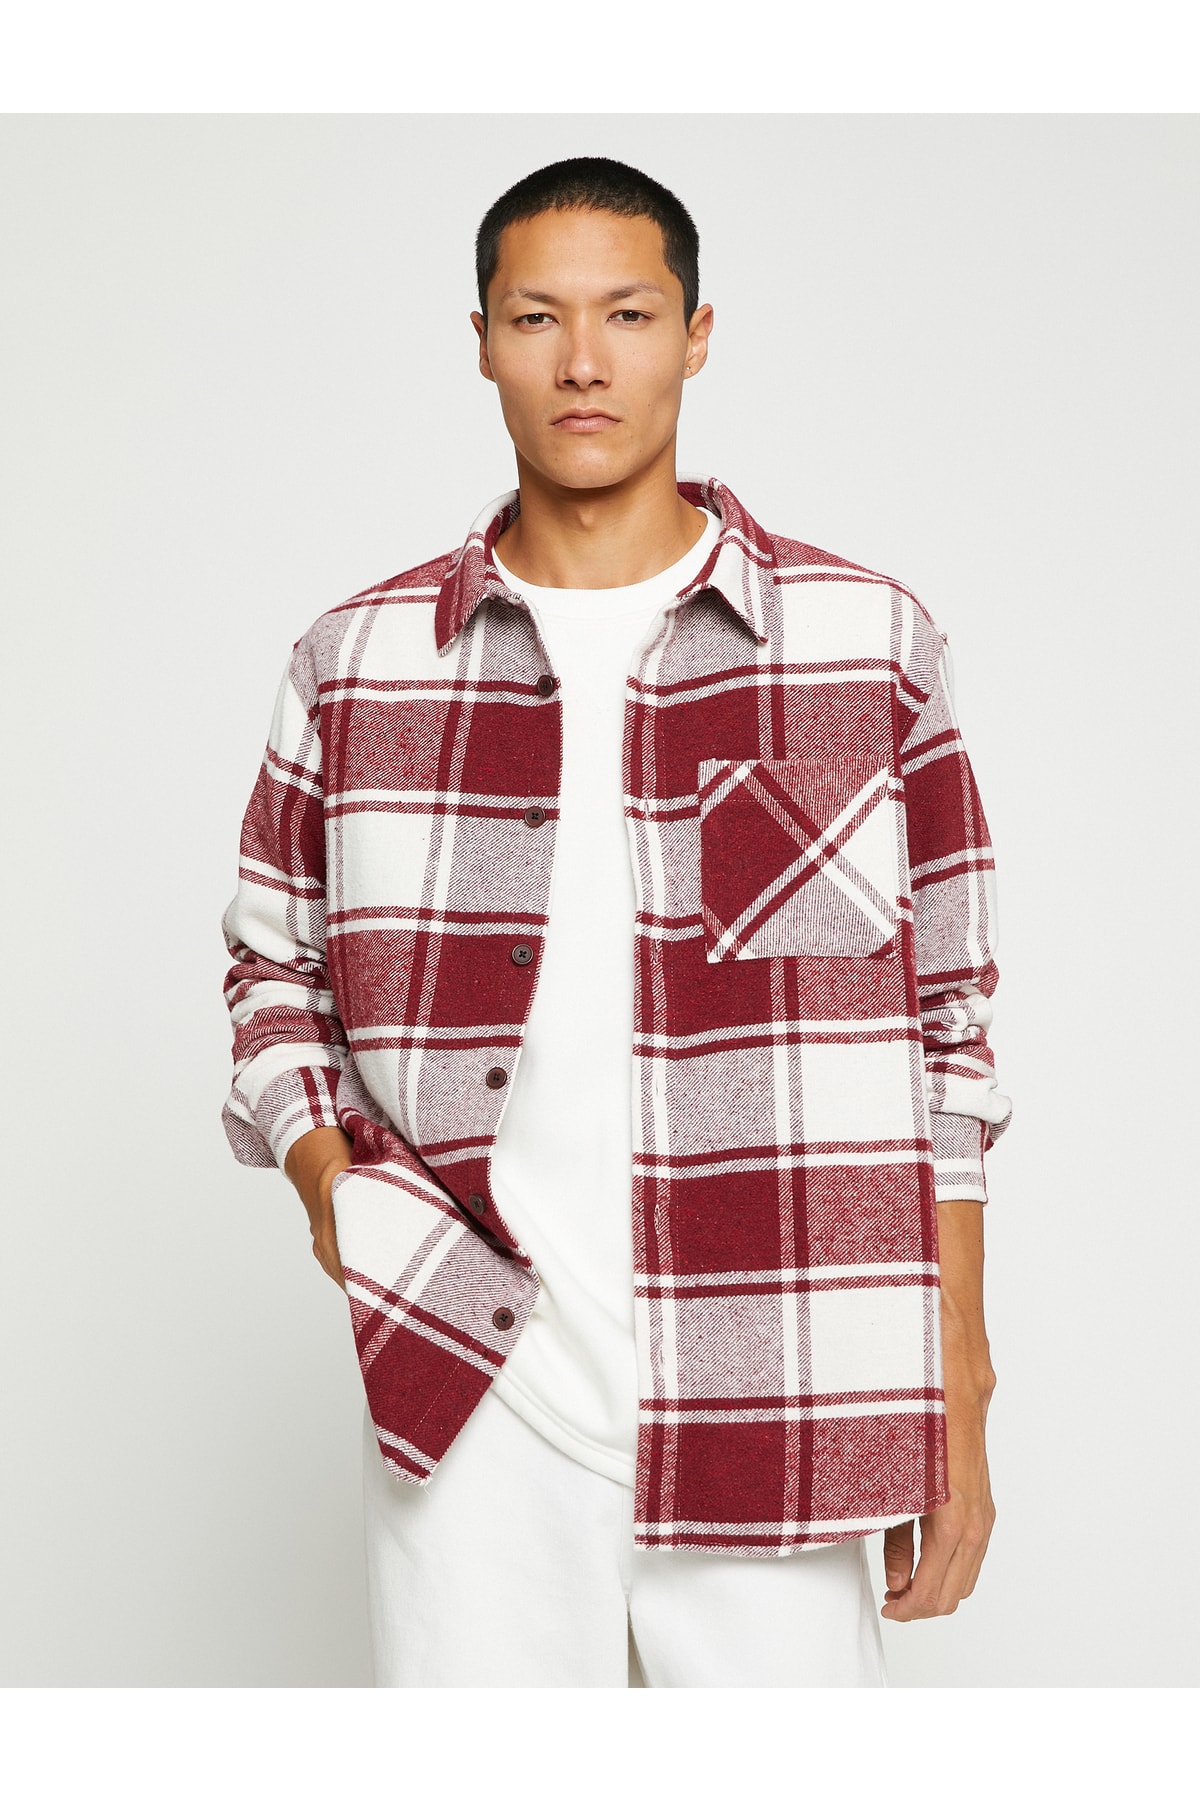 Koton Checkered Lumberjack Shirt with Pocket Detailed and Buttons Long Sleeves